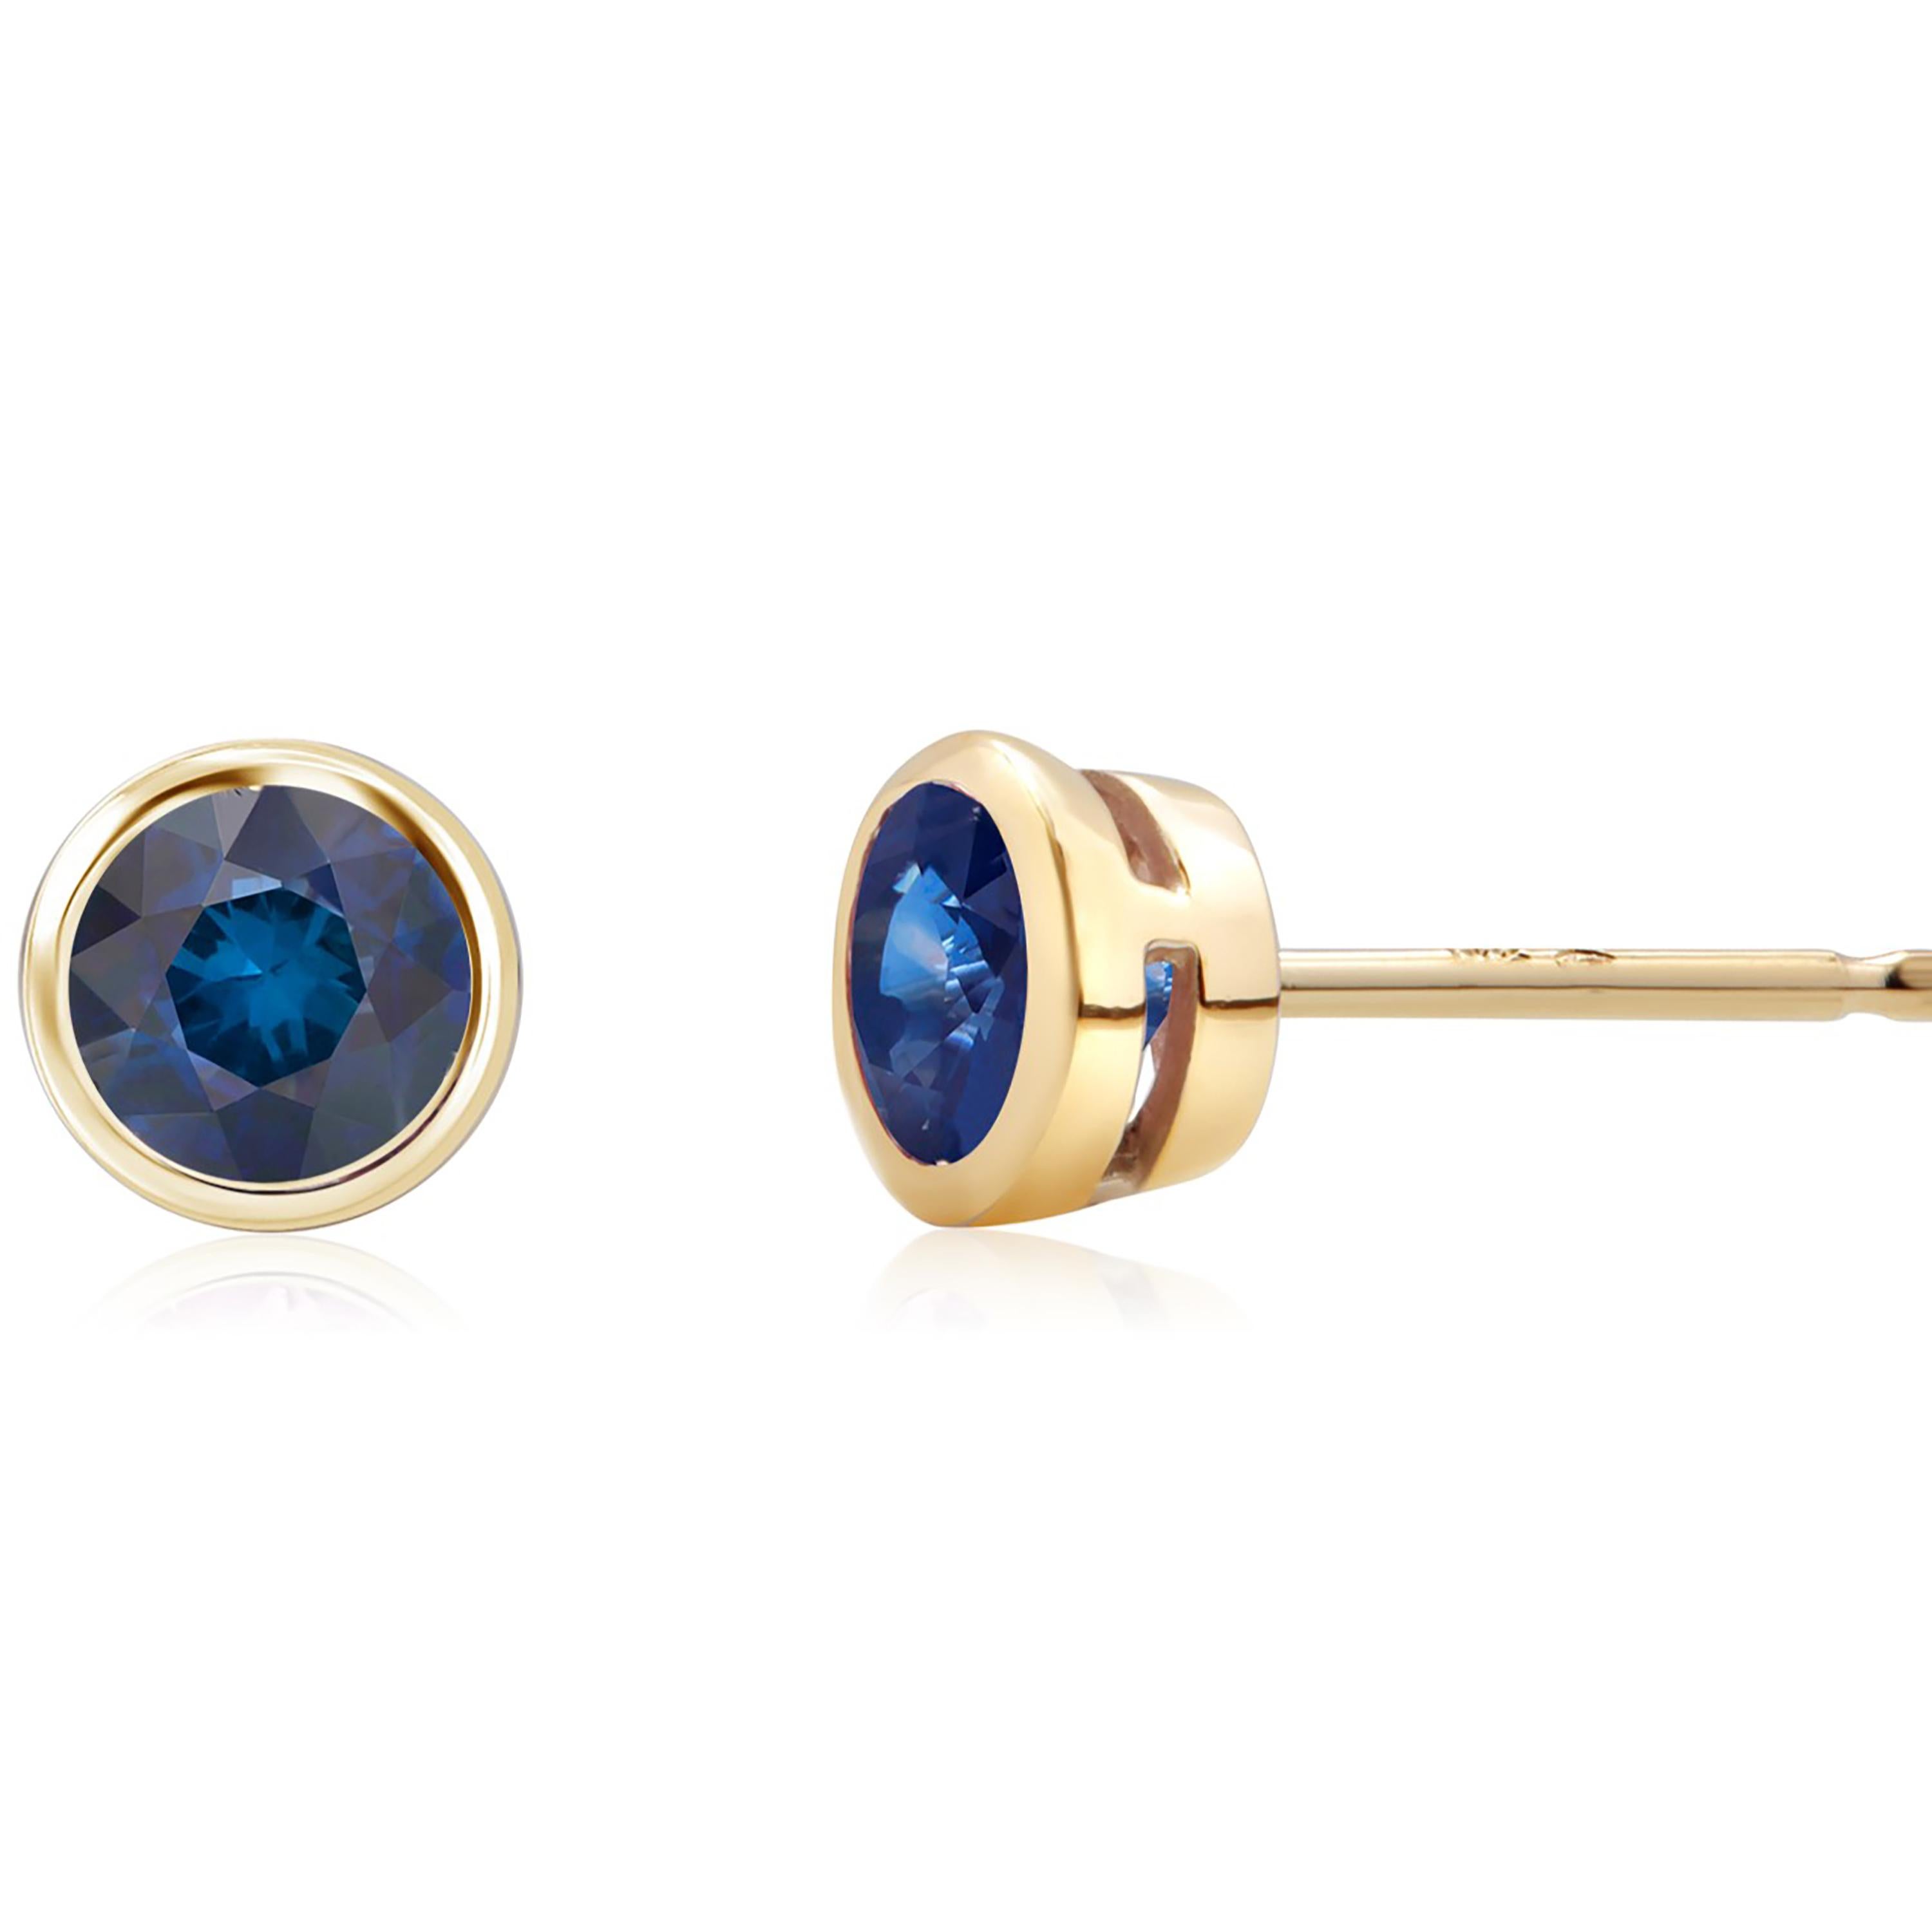 Round Cut Matched Round Sapphire 0.40 Carat 14 Karat Yellow Gold 0.15 Inch Stud Earrings 